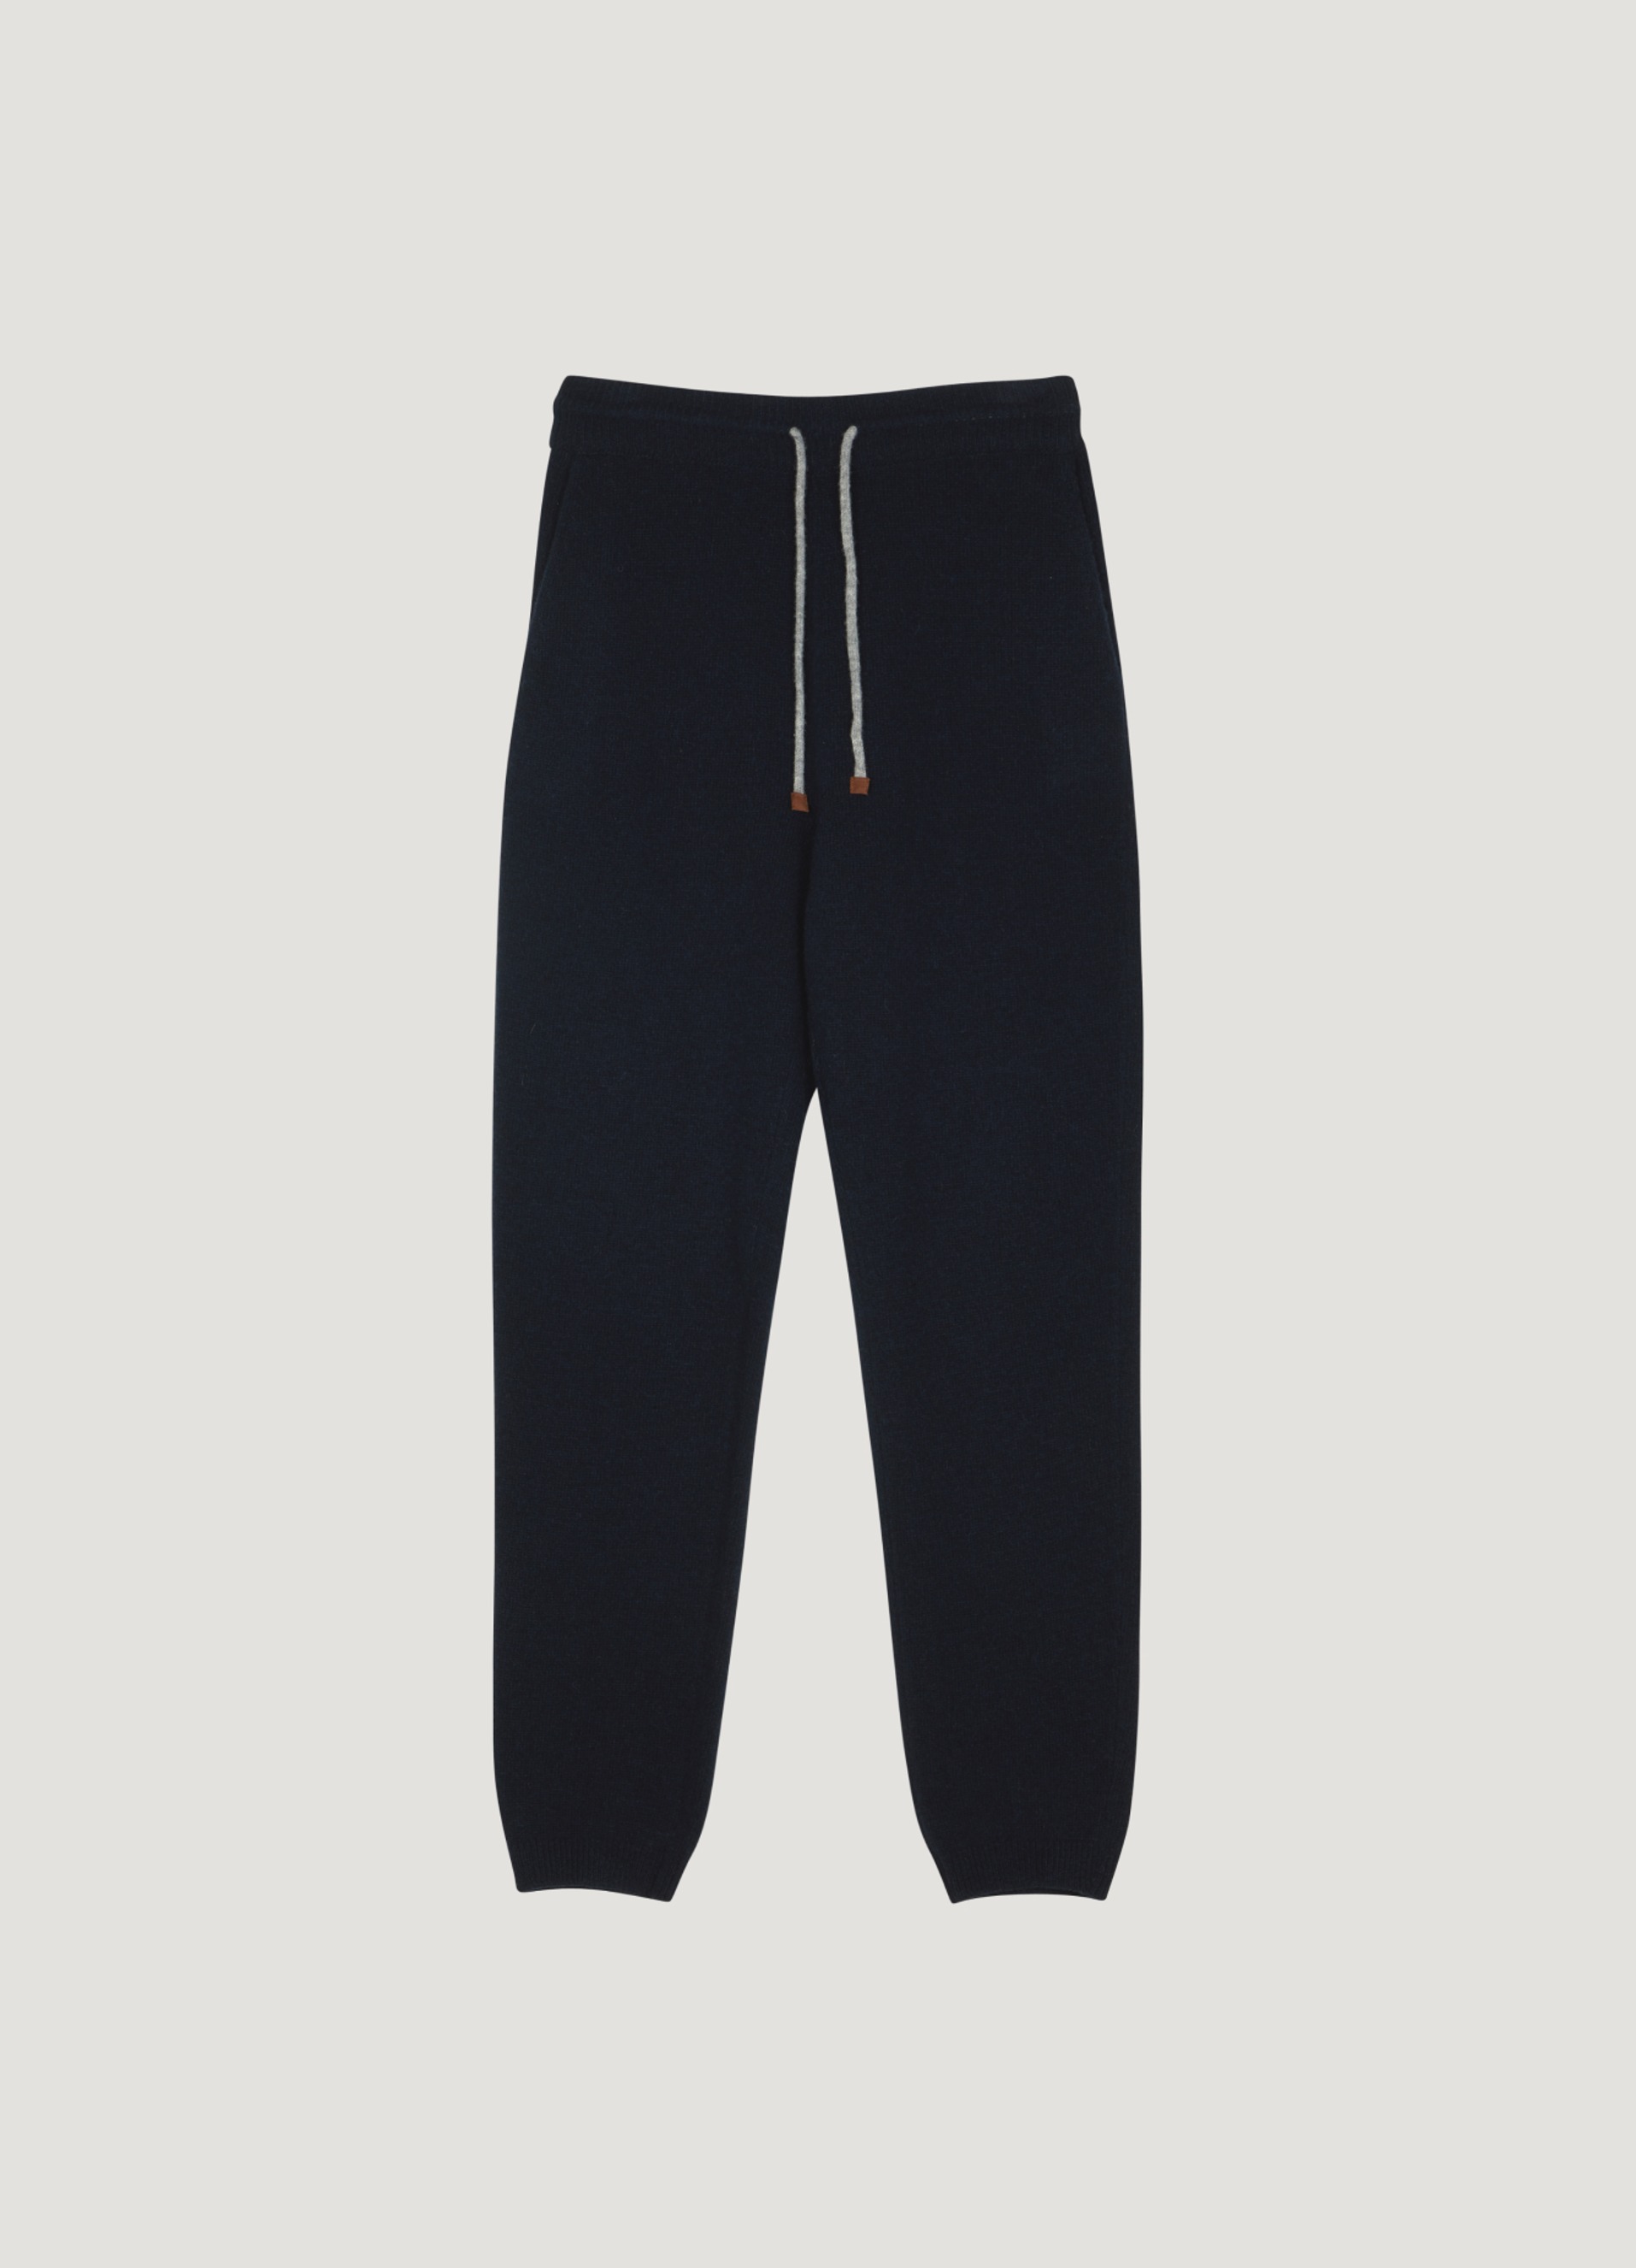 Cashmere Blend Knit Pants (Navy) Out Of Stock